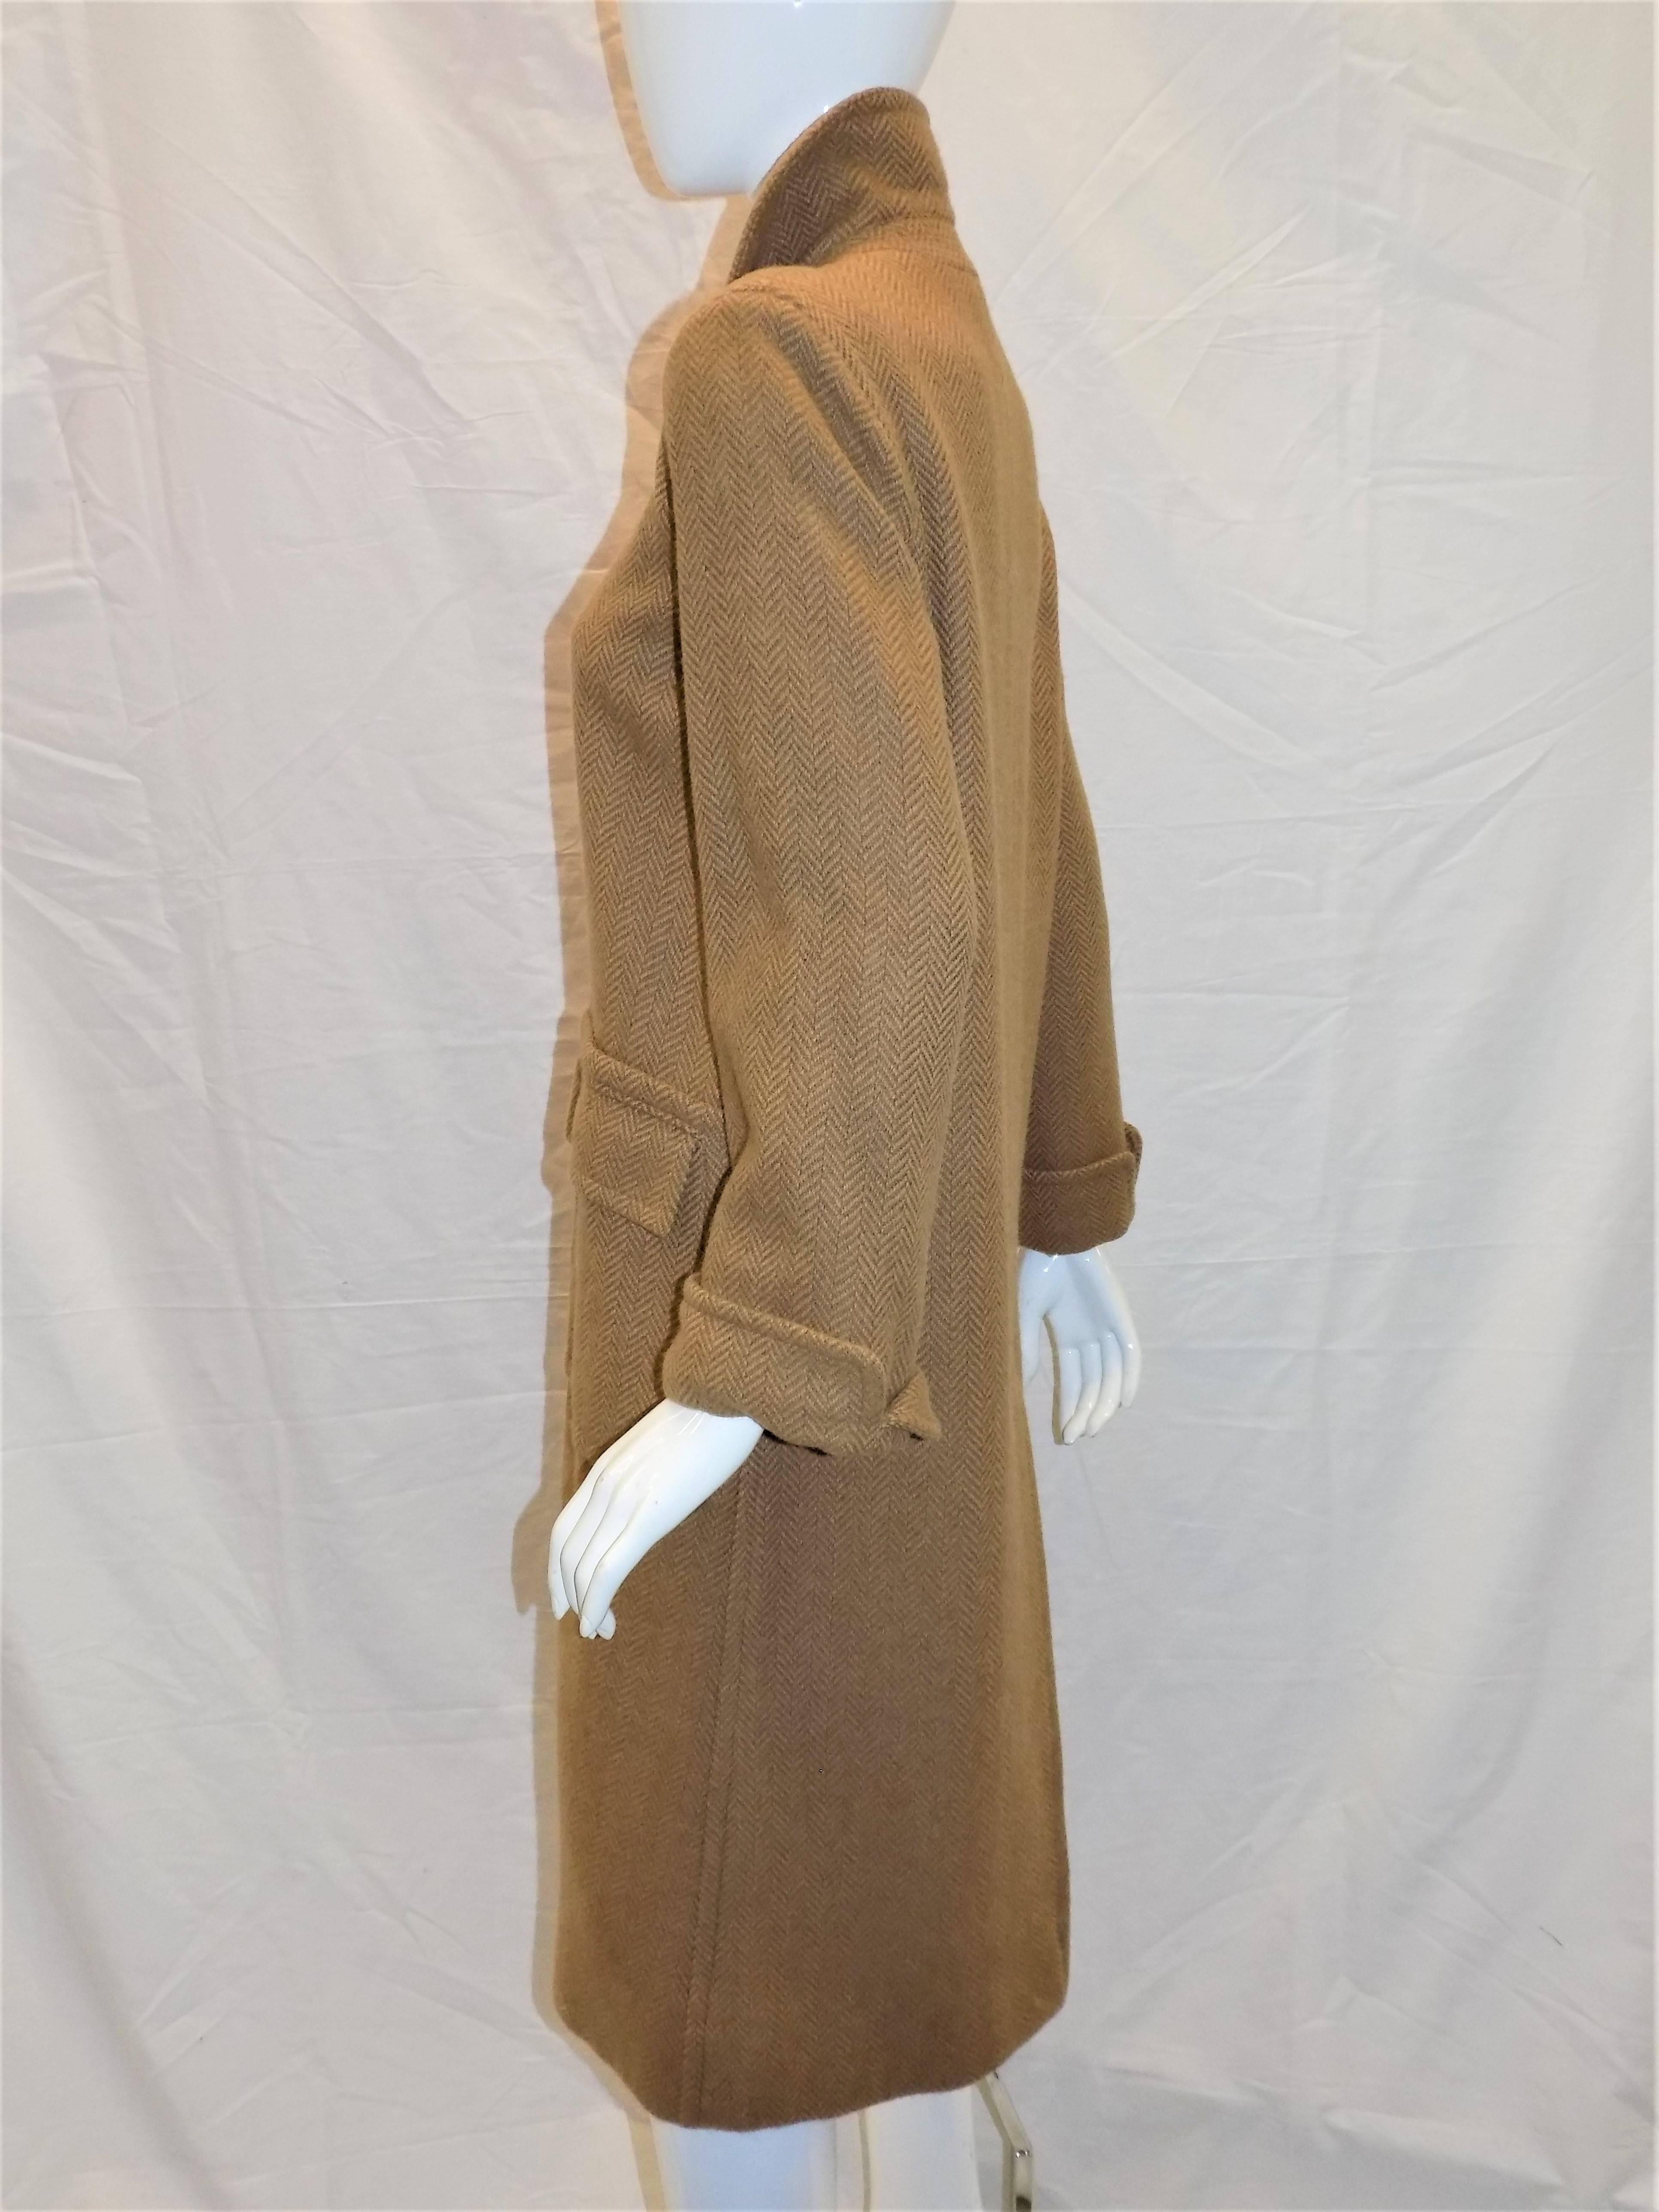 Beautiful classic YSL Yves Saint Laurent Rive Gauche Vintage camel color  haring bone coat. Two front patch flap pockets. Single front buttons. Fully lined. Pristine condition. Size tag is missing. Please refer to measurements. I believe it is sz 6.